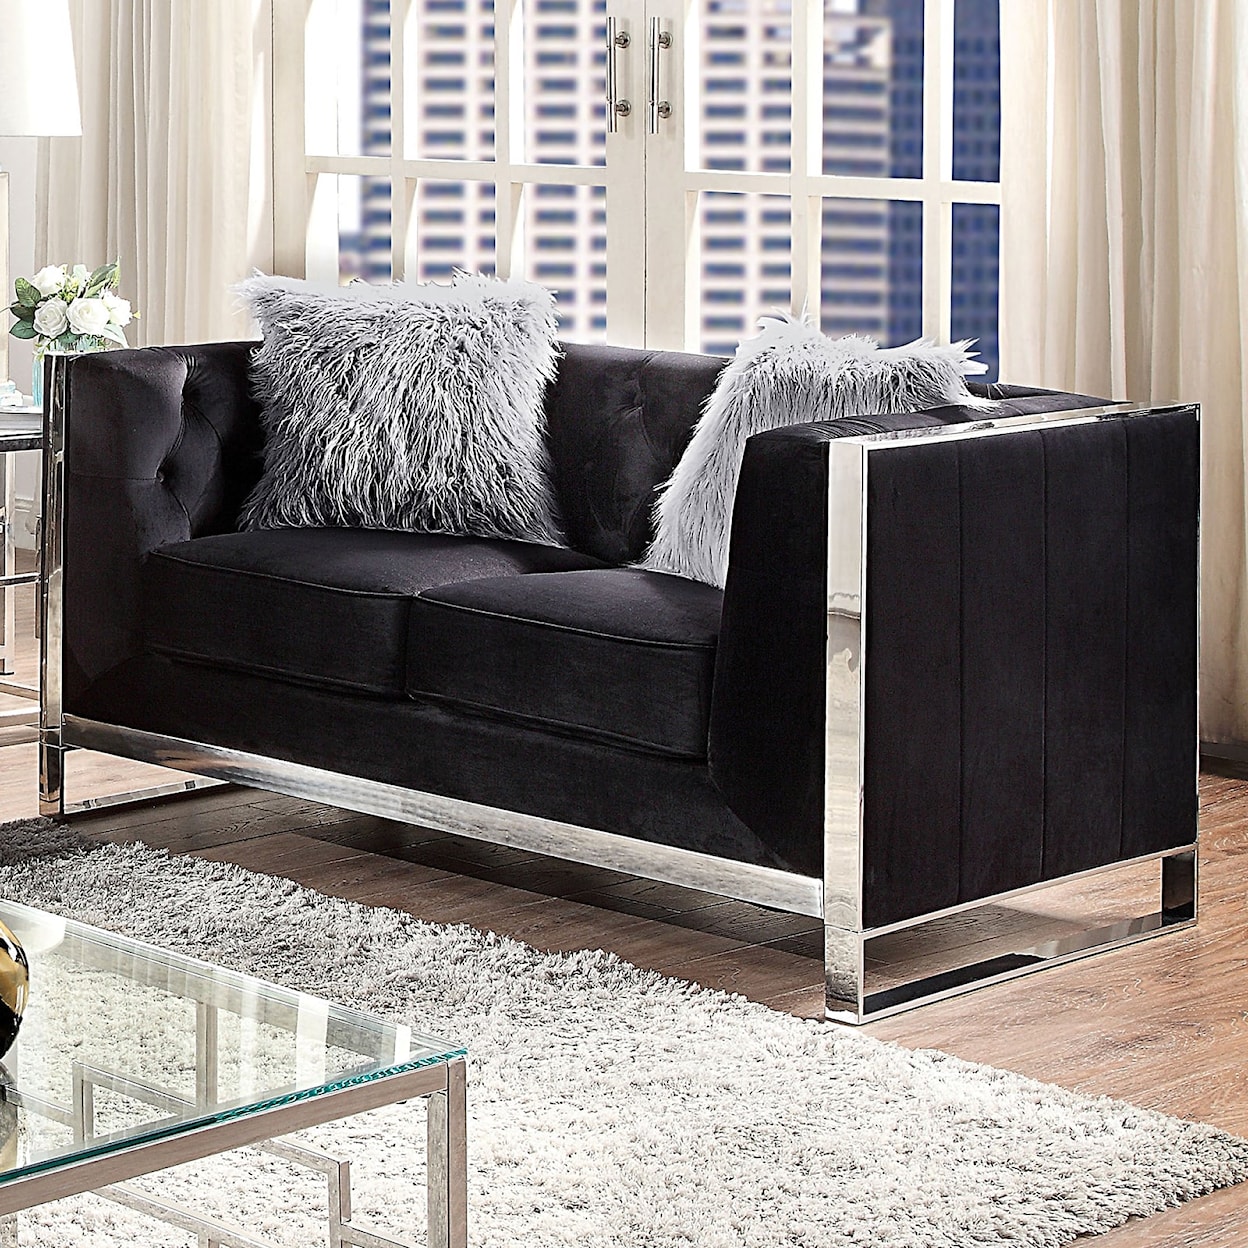 Furniture of America EVADNE Black Loveseat with Pillows